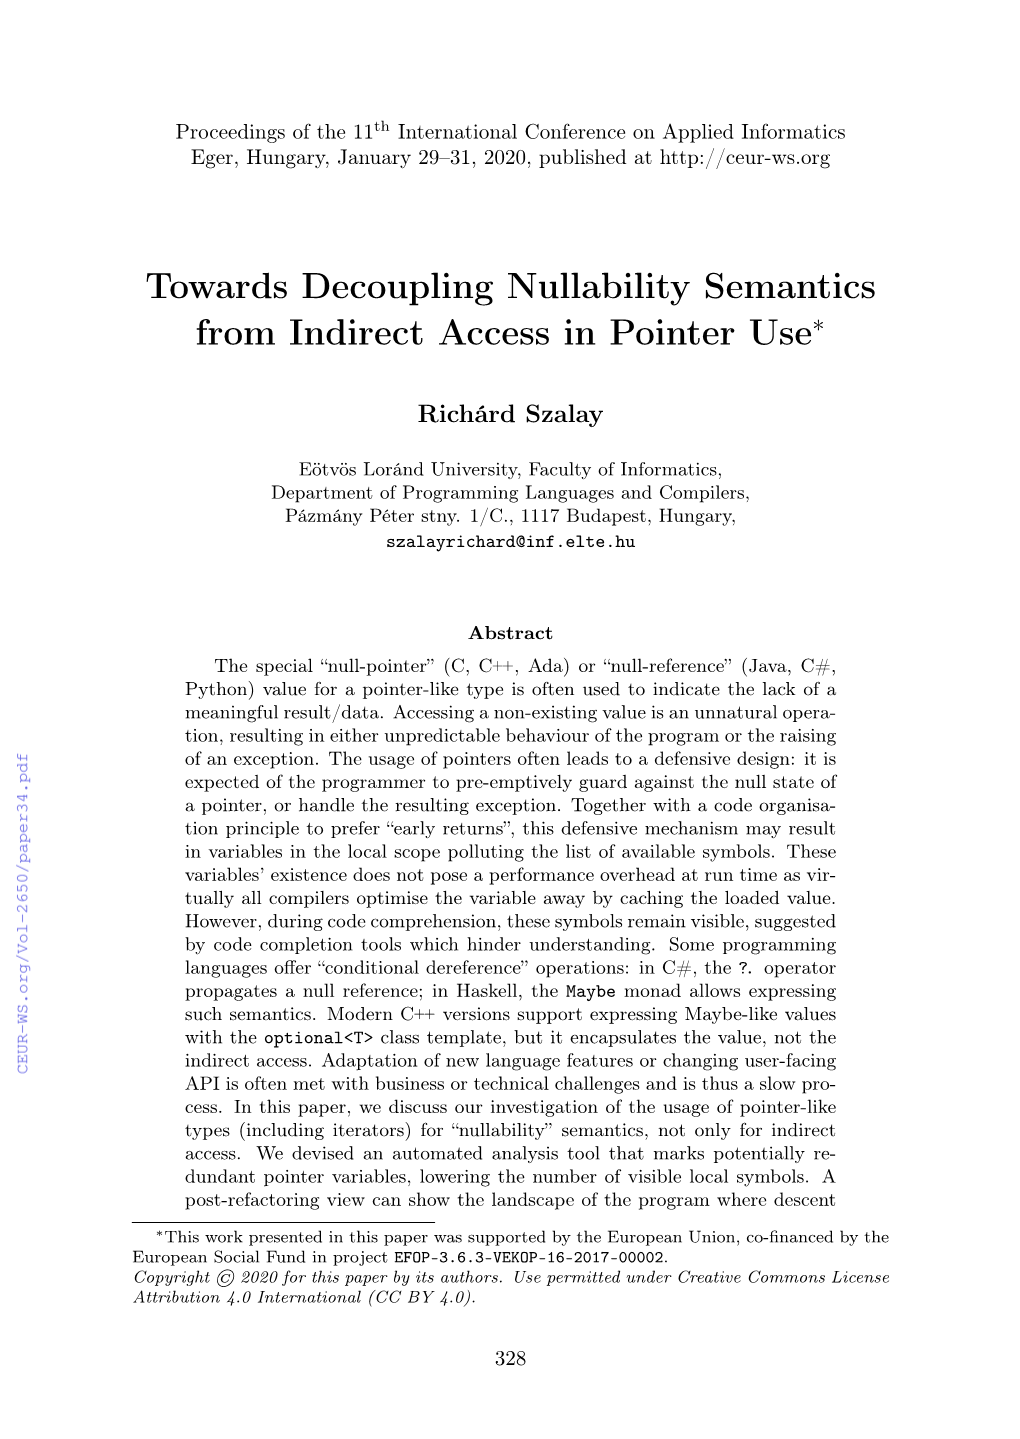 Towards Decoupling Nullability Semantics from Indirect Access in Pointer Use∗